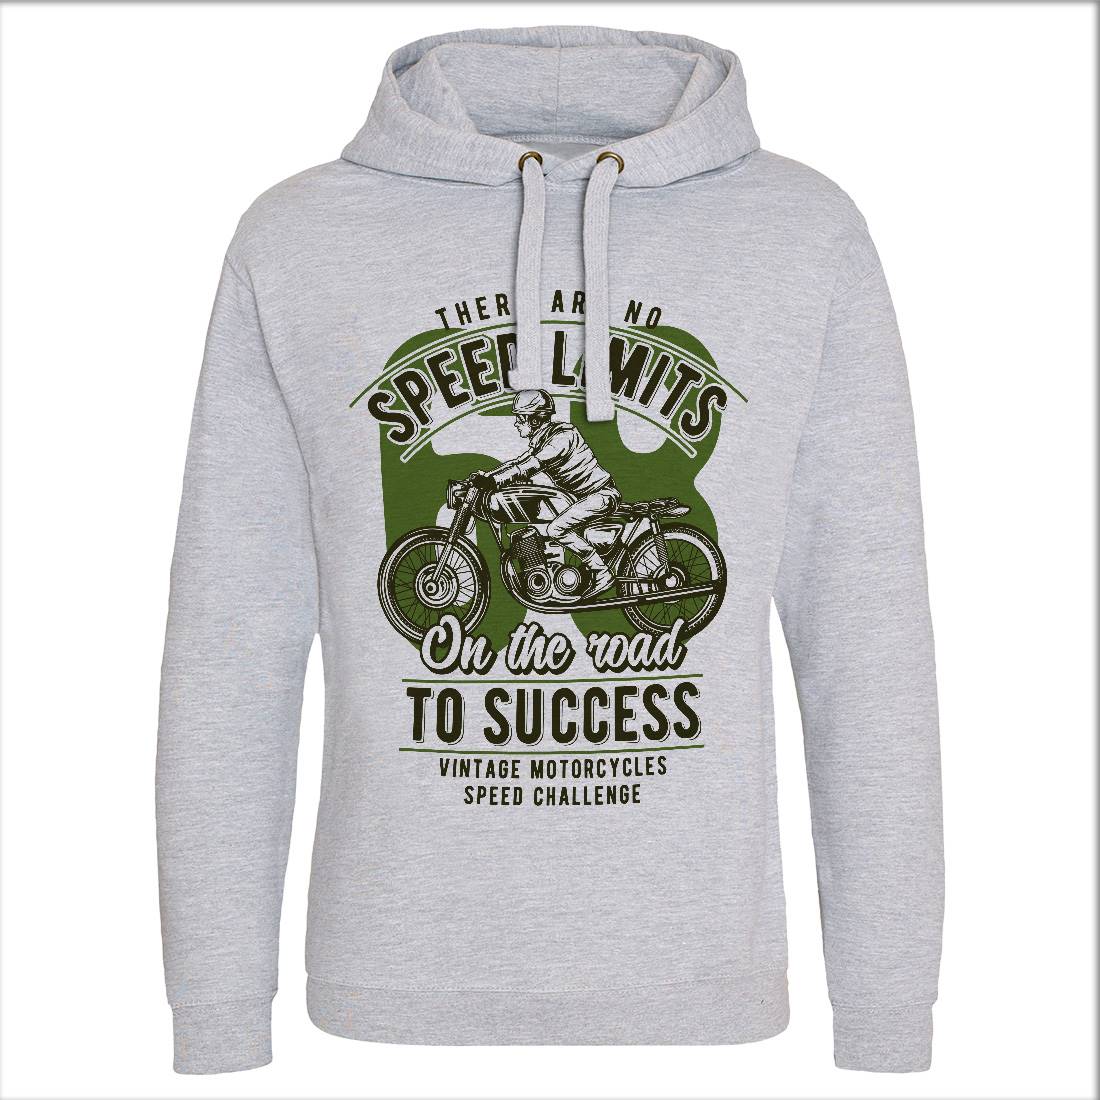 Speed Limits Mens Hoodie Without Pocket Motorcycles B858